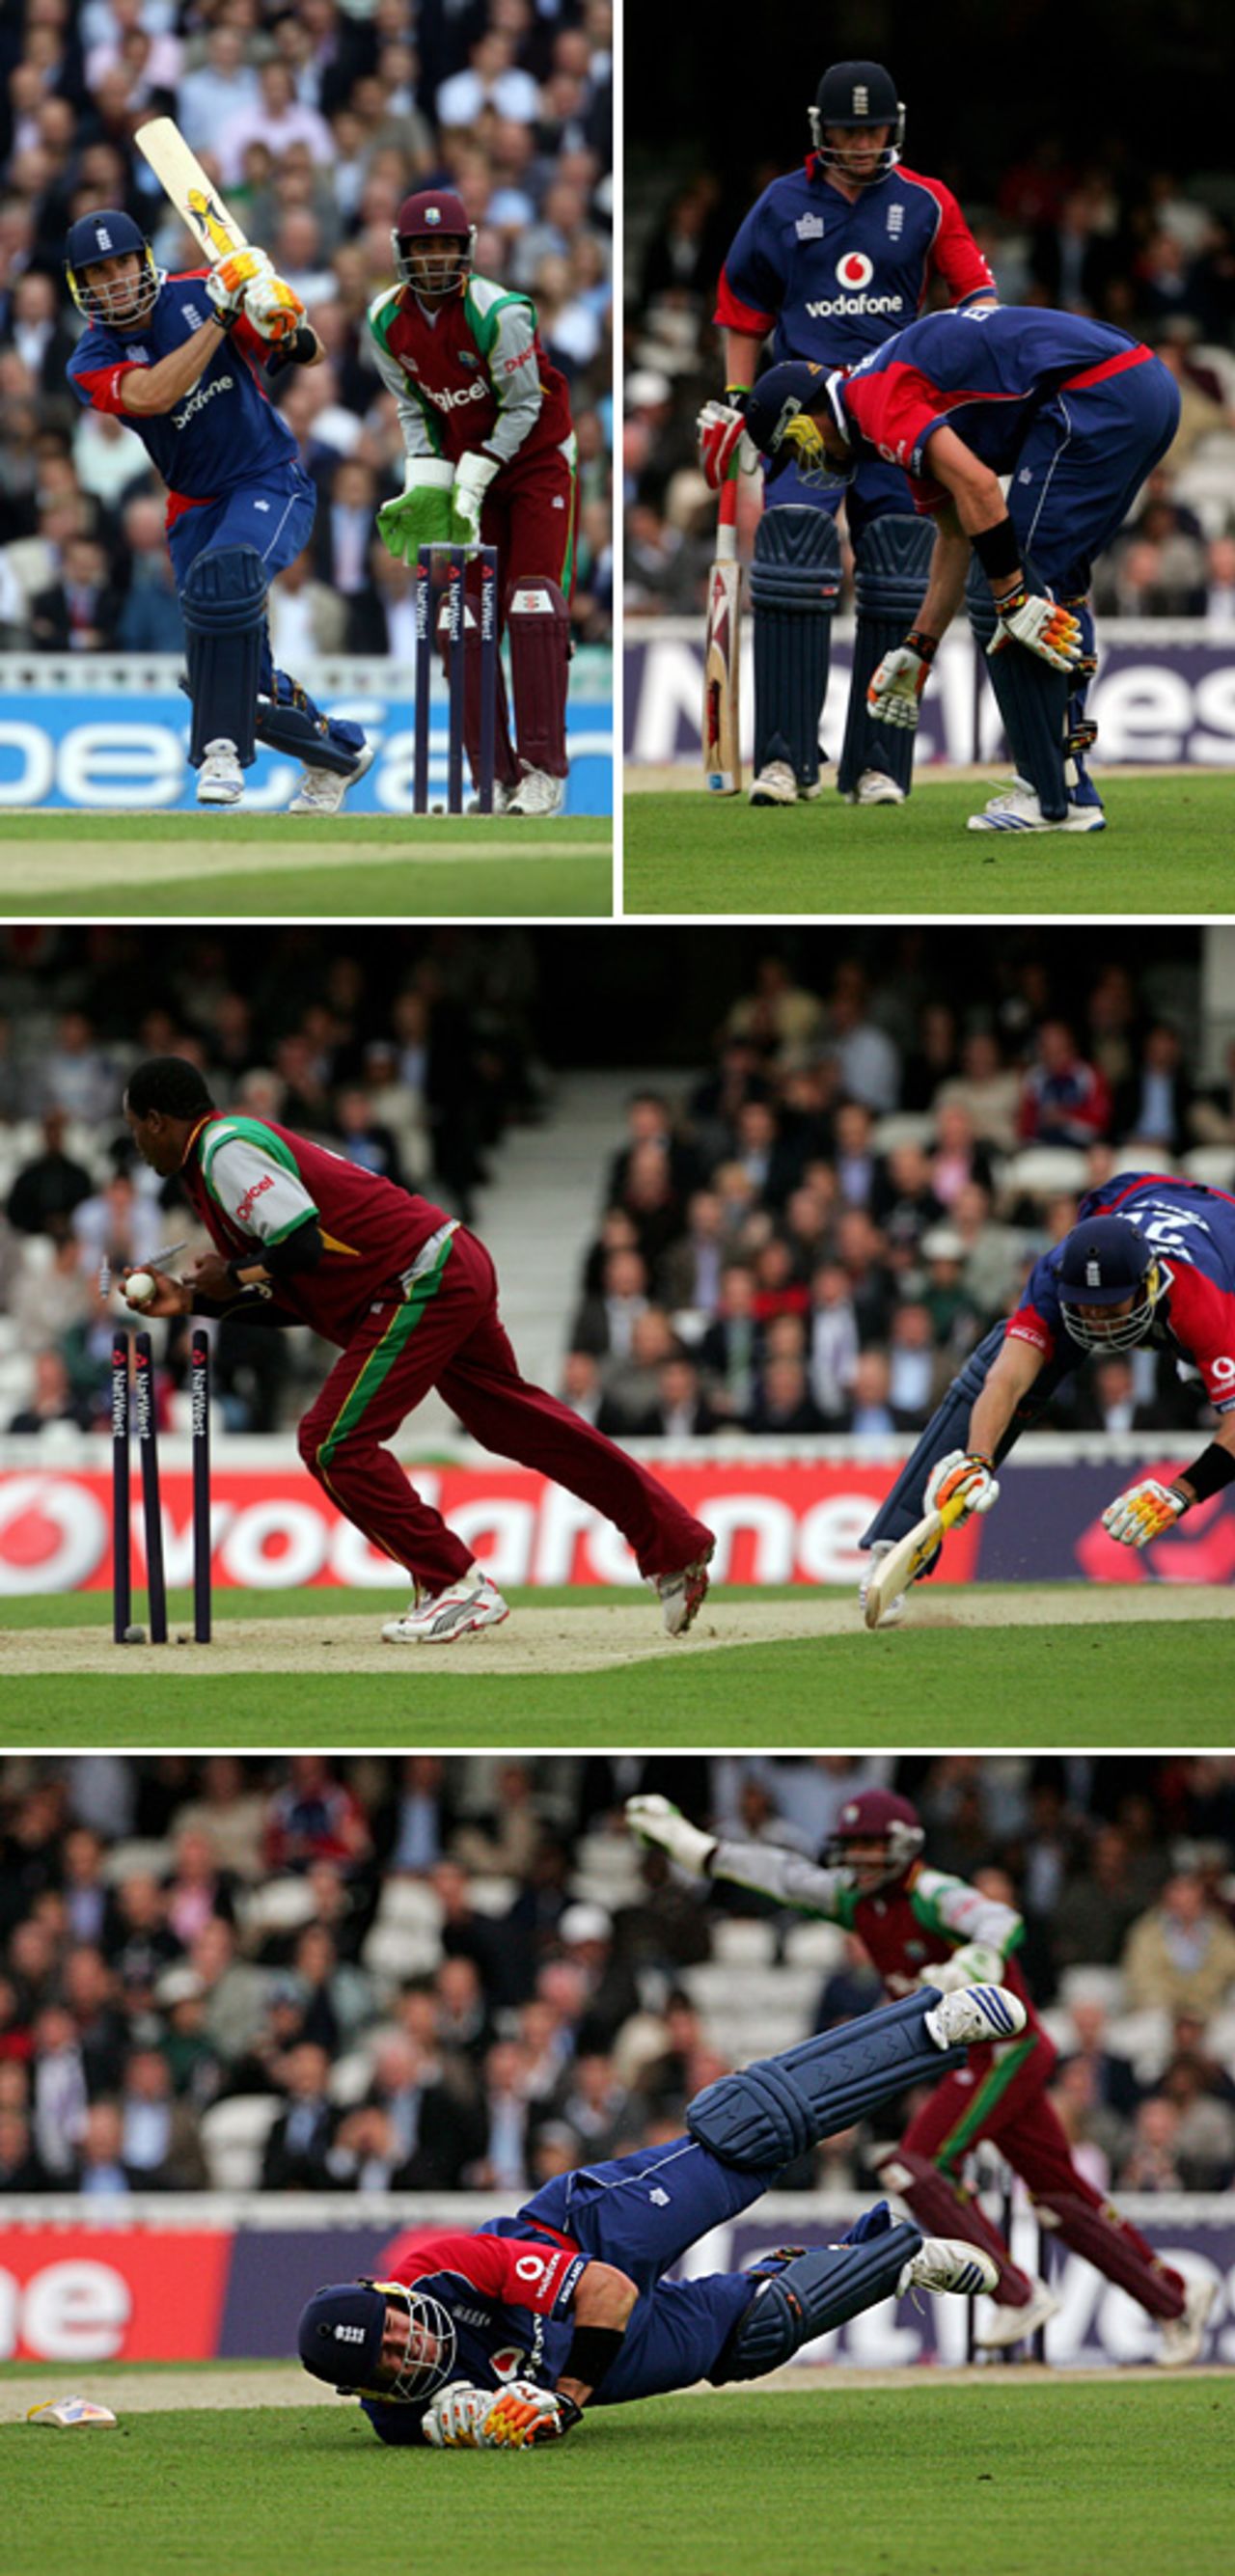 A collage of Kevin Pietersen landing heavily, hurting his knee and being run out for 16, England v West Indies, Twenty20, The Oval, June 28, 2007